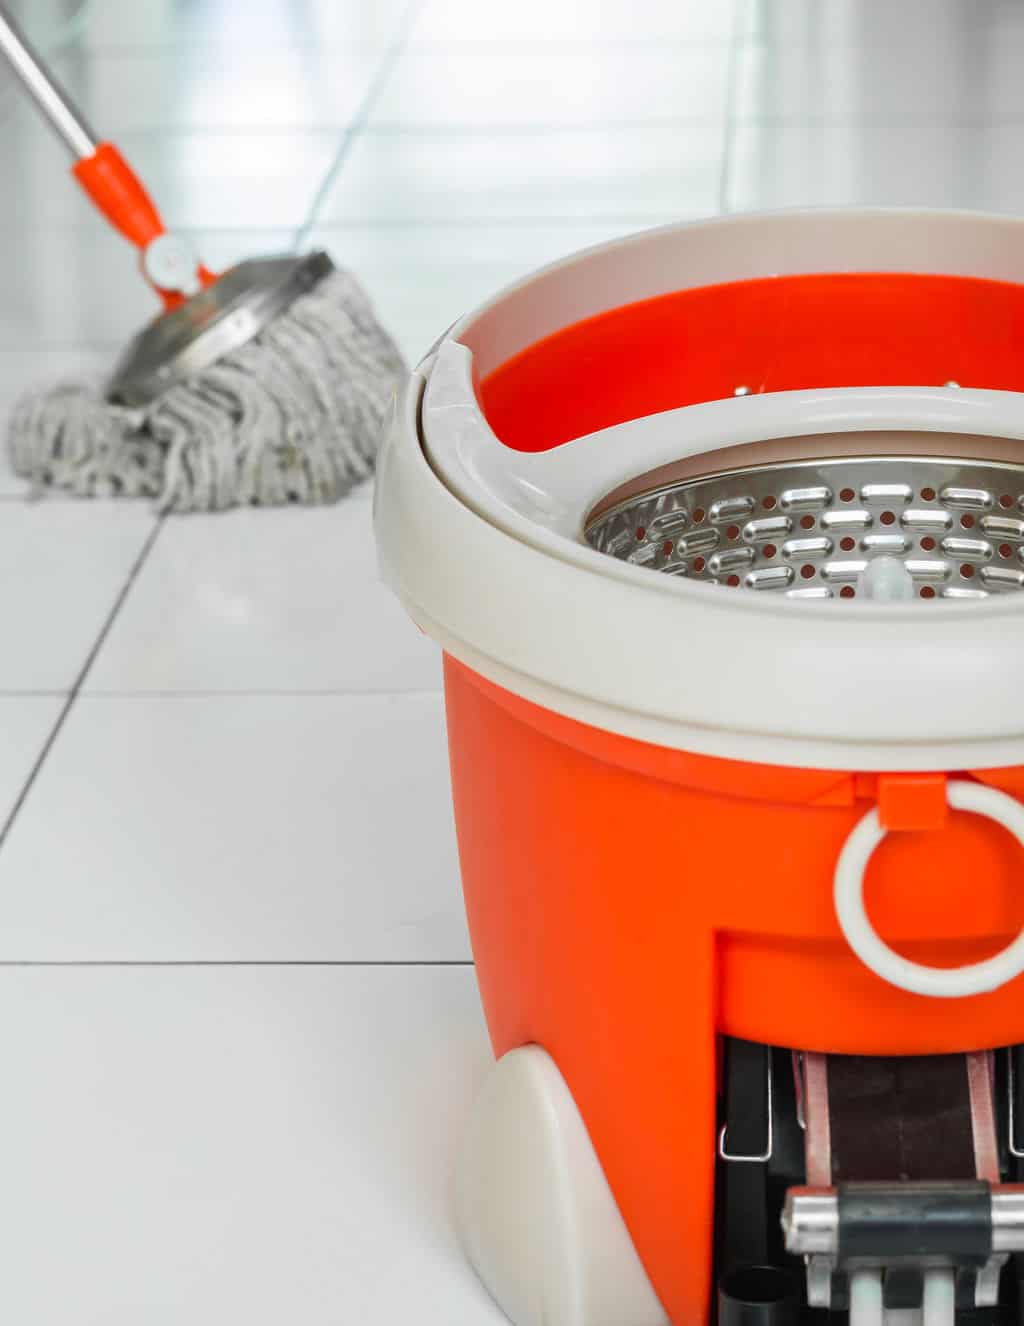 How To Clean Mops Laminate Floors, Spin Mop For Laminate Floors